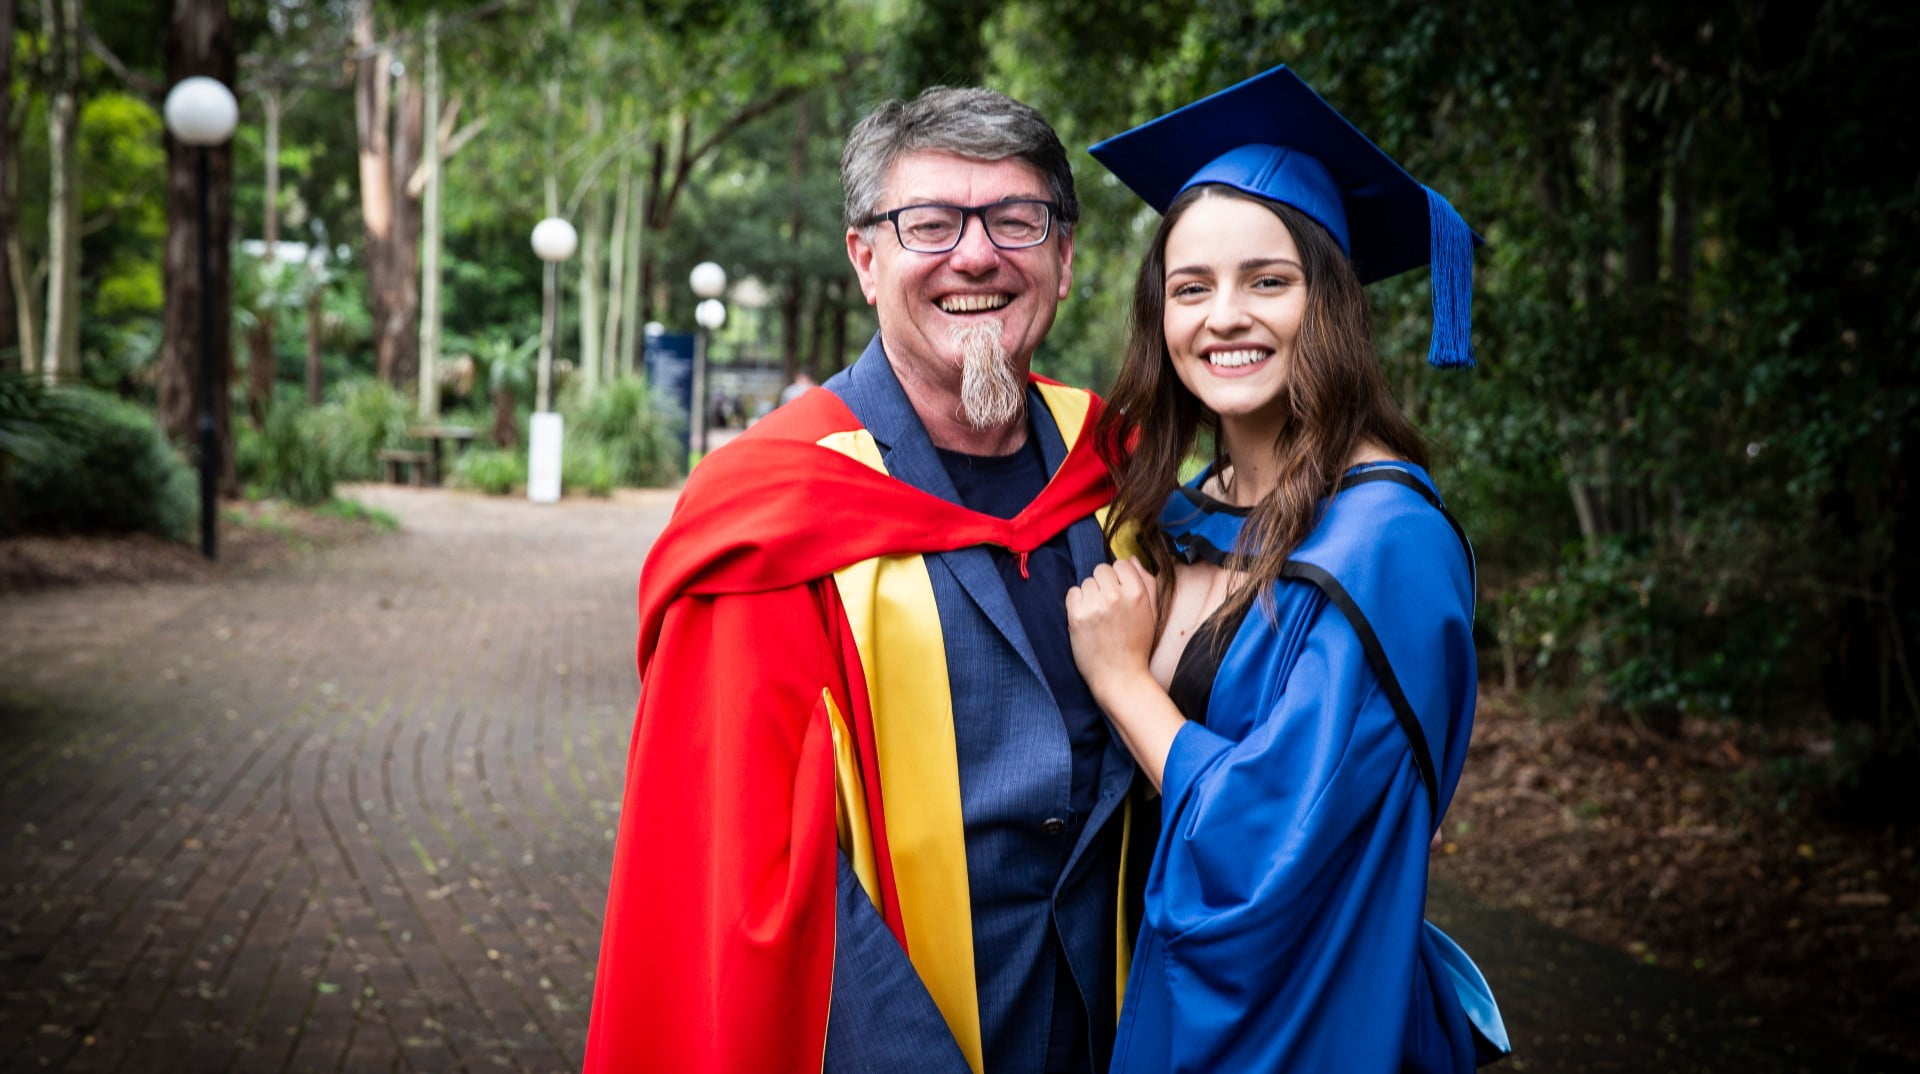 Biomedical engineering graduate Eileen Wallace with her father Professor Gordon Wallace in her graduation gown at UOW's Wollongong campus. Photo: Paul Jones